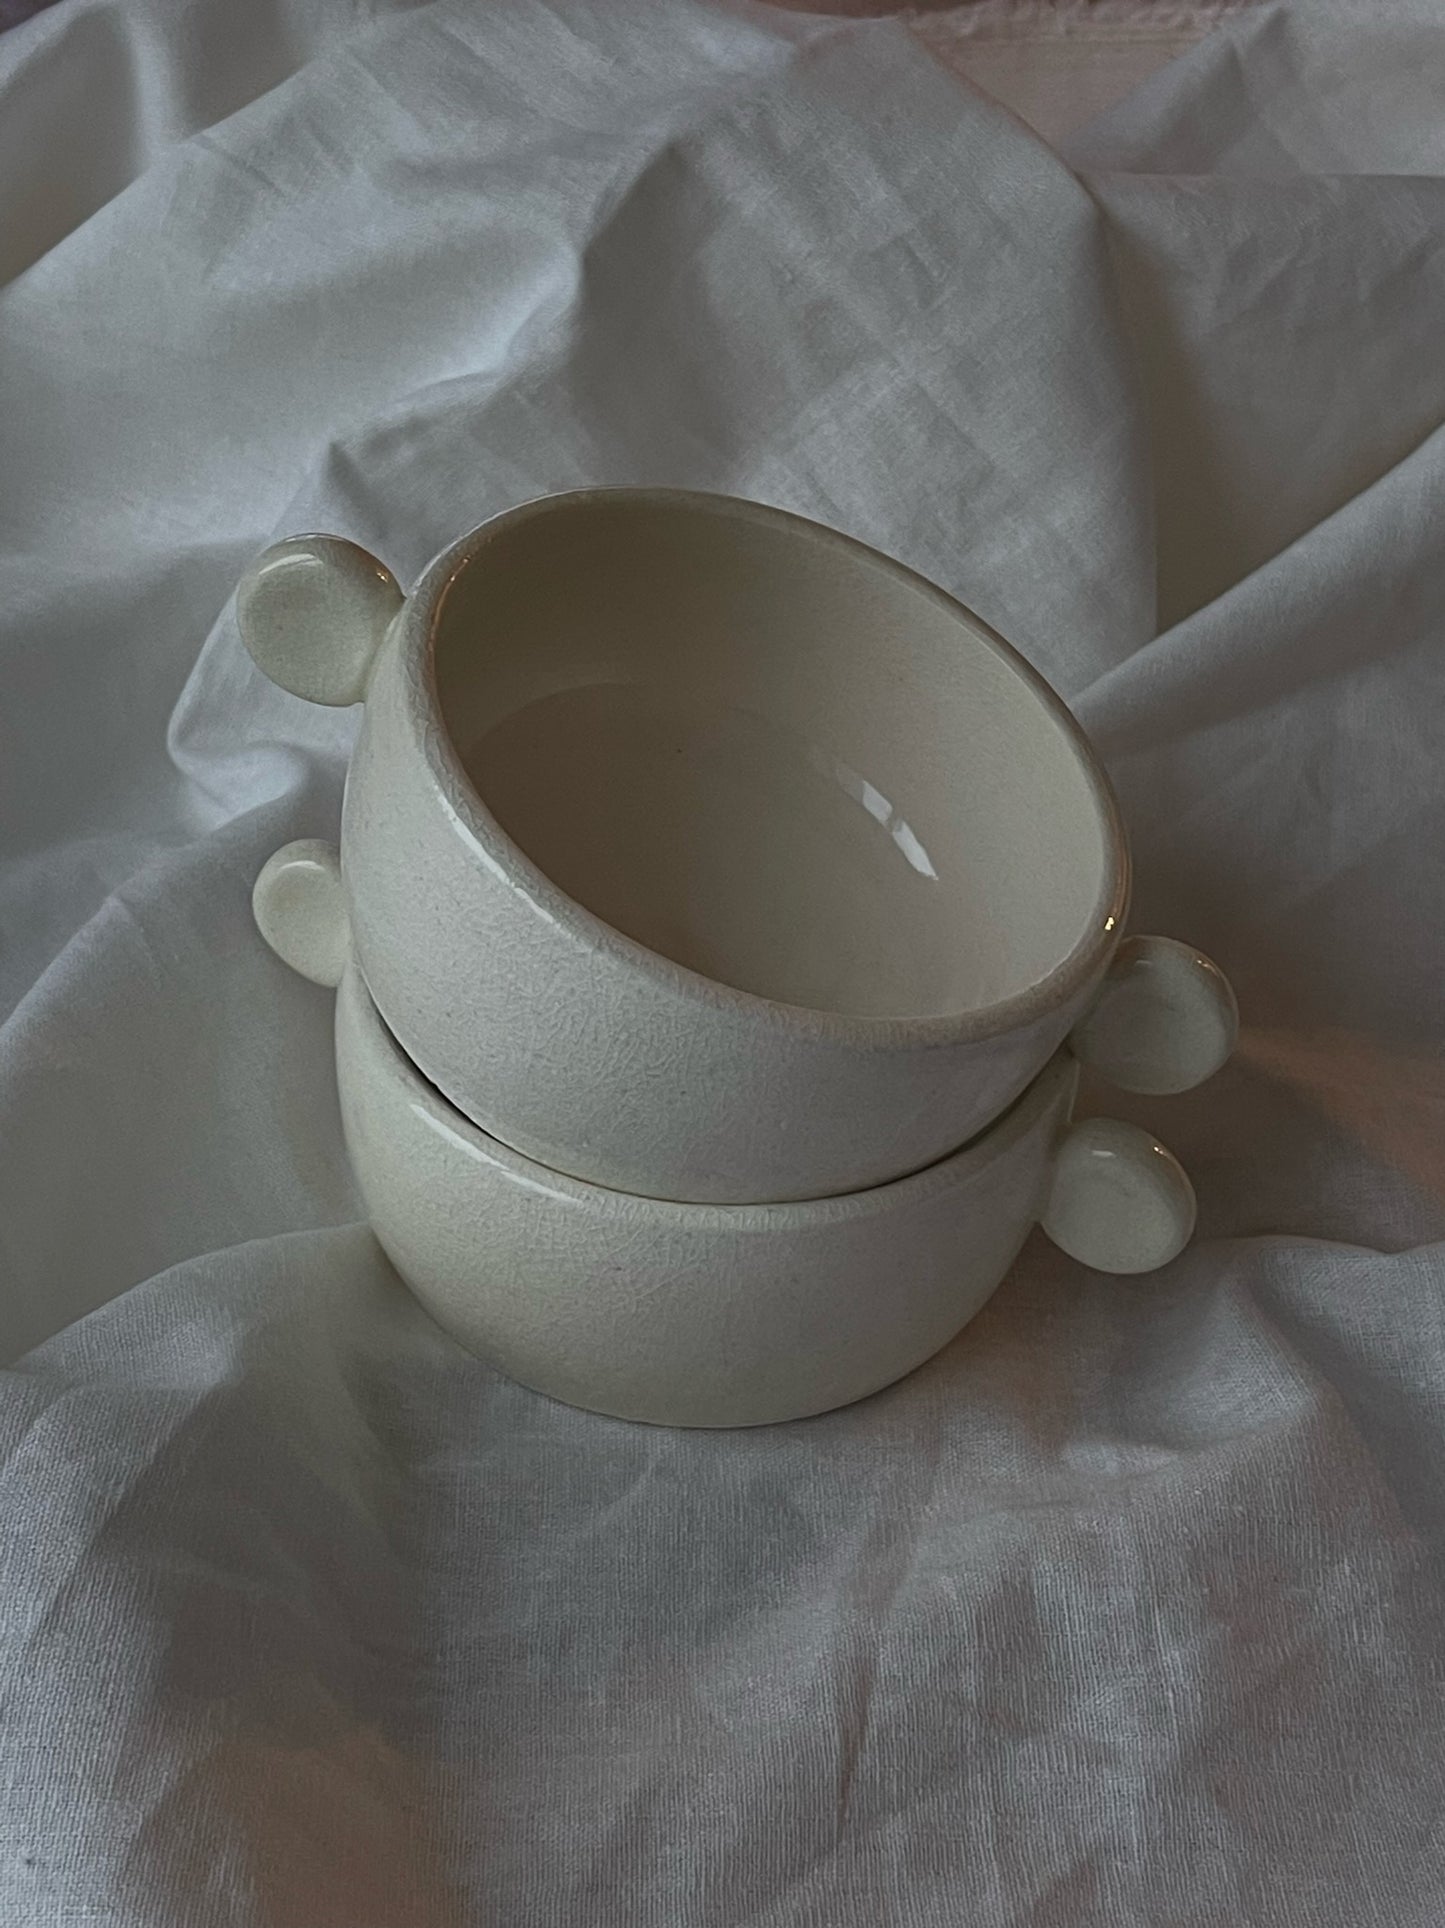 Small-sized artisanal kitchenware bowl for soups and serving